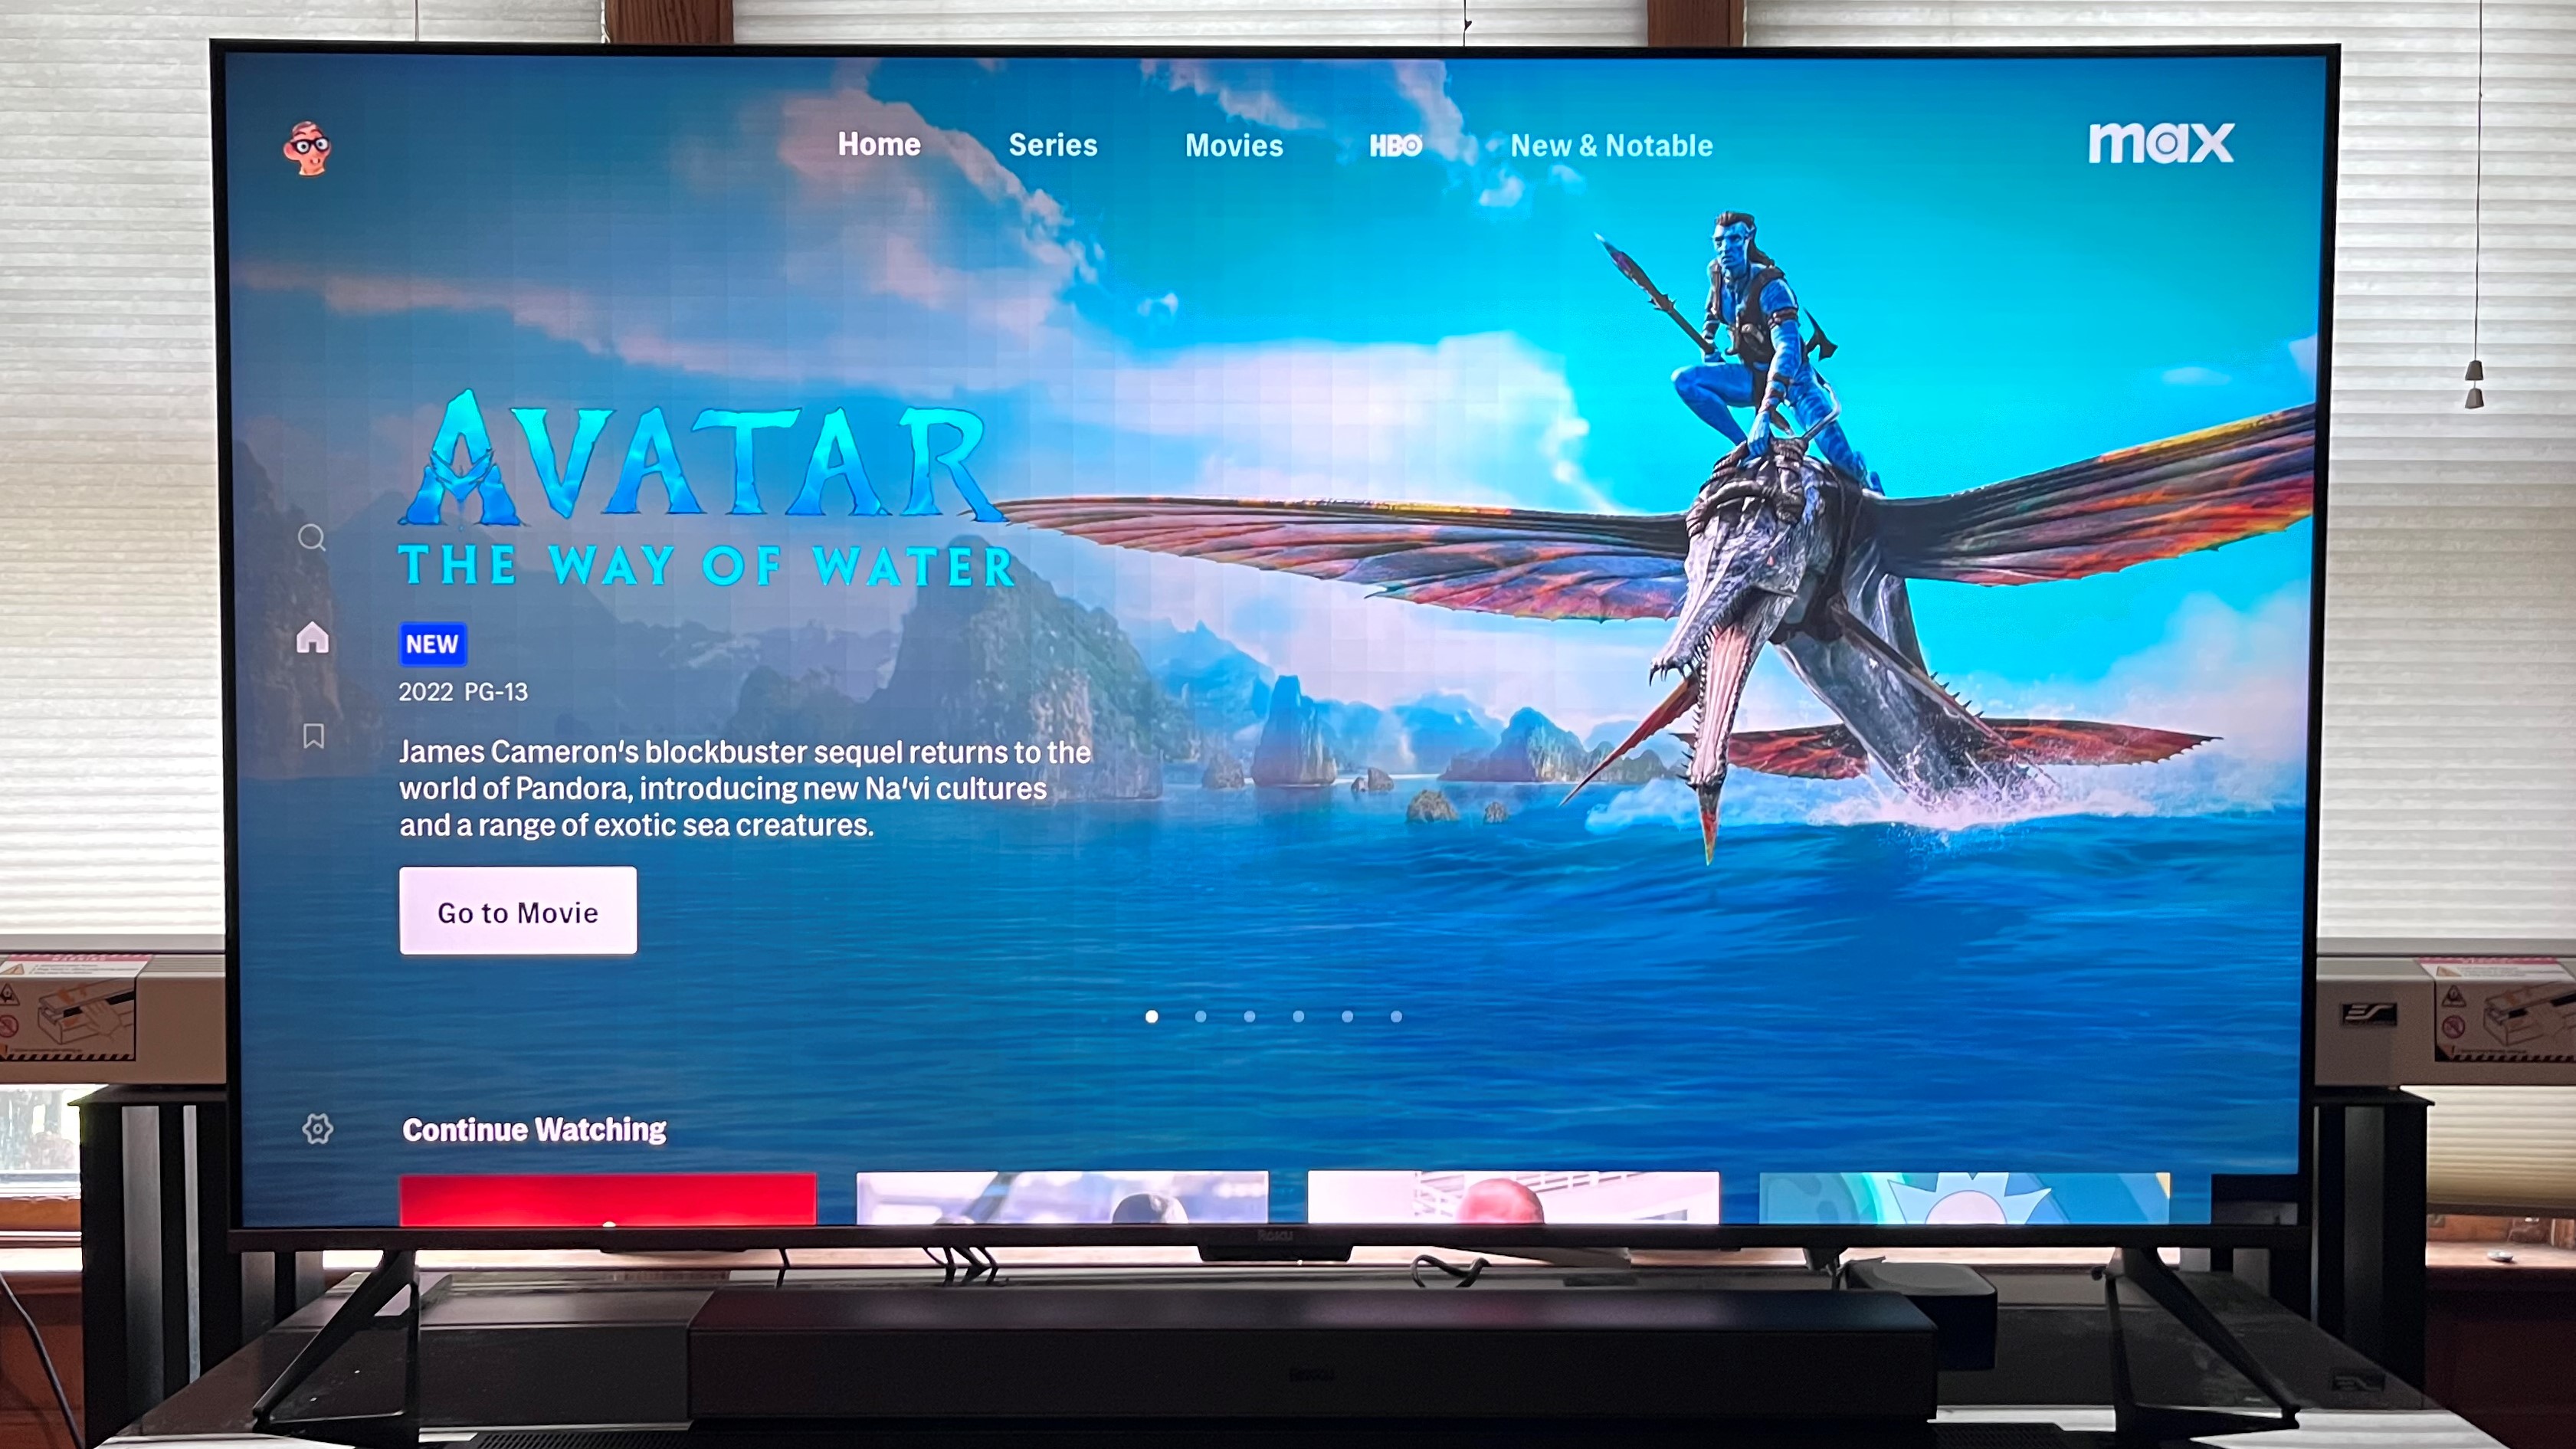 Roku Plus Series TV showing Max app screen with Avatar 2